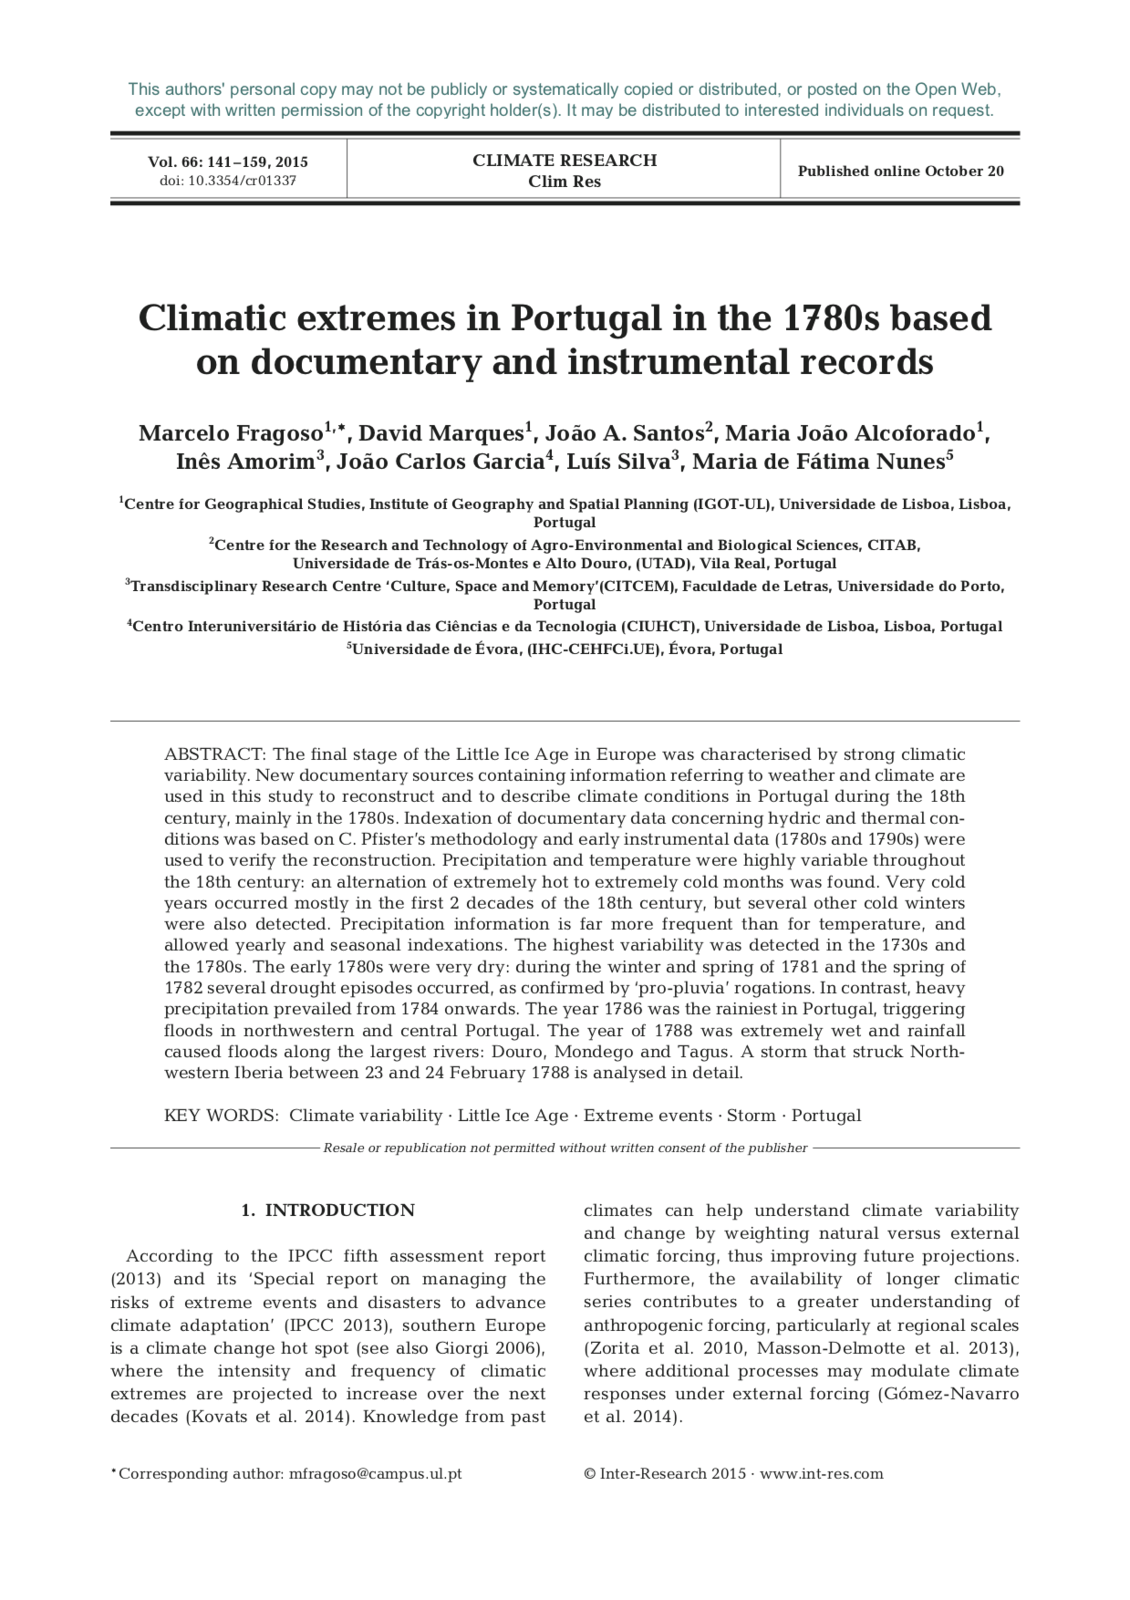 Climatic Extremes in Portugal in the 1780s based on documentary and instrumental records, Capa